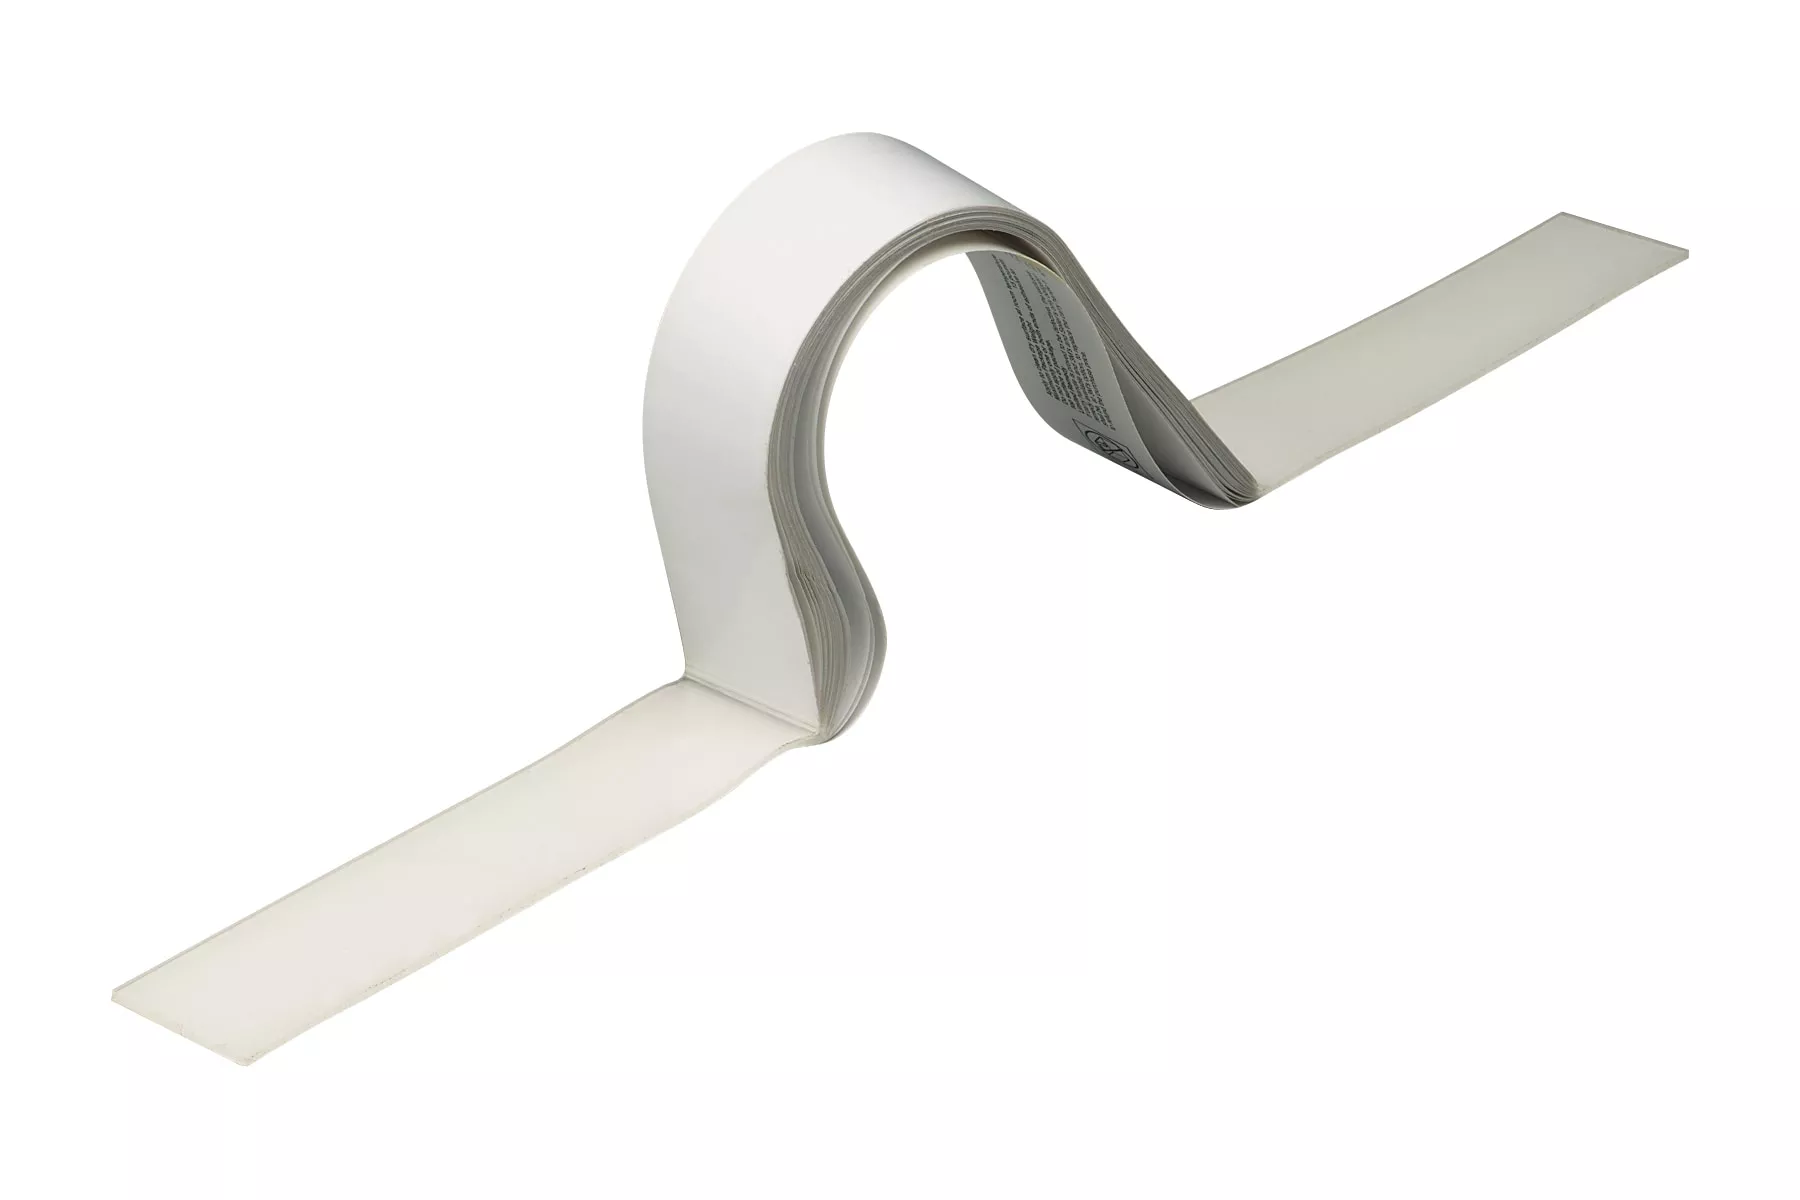 3M™ Carry Handle 8350, White, 1-3/8 in x 23 in x 6 in, (25 Handle/Pad)
Case